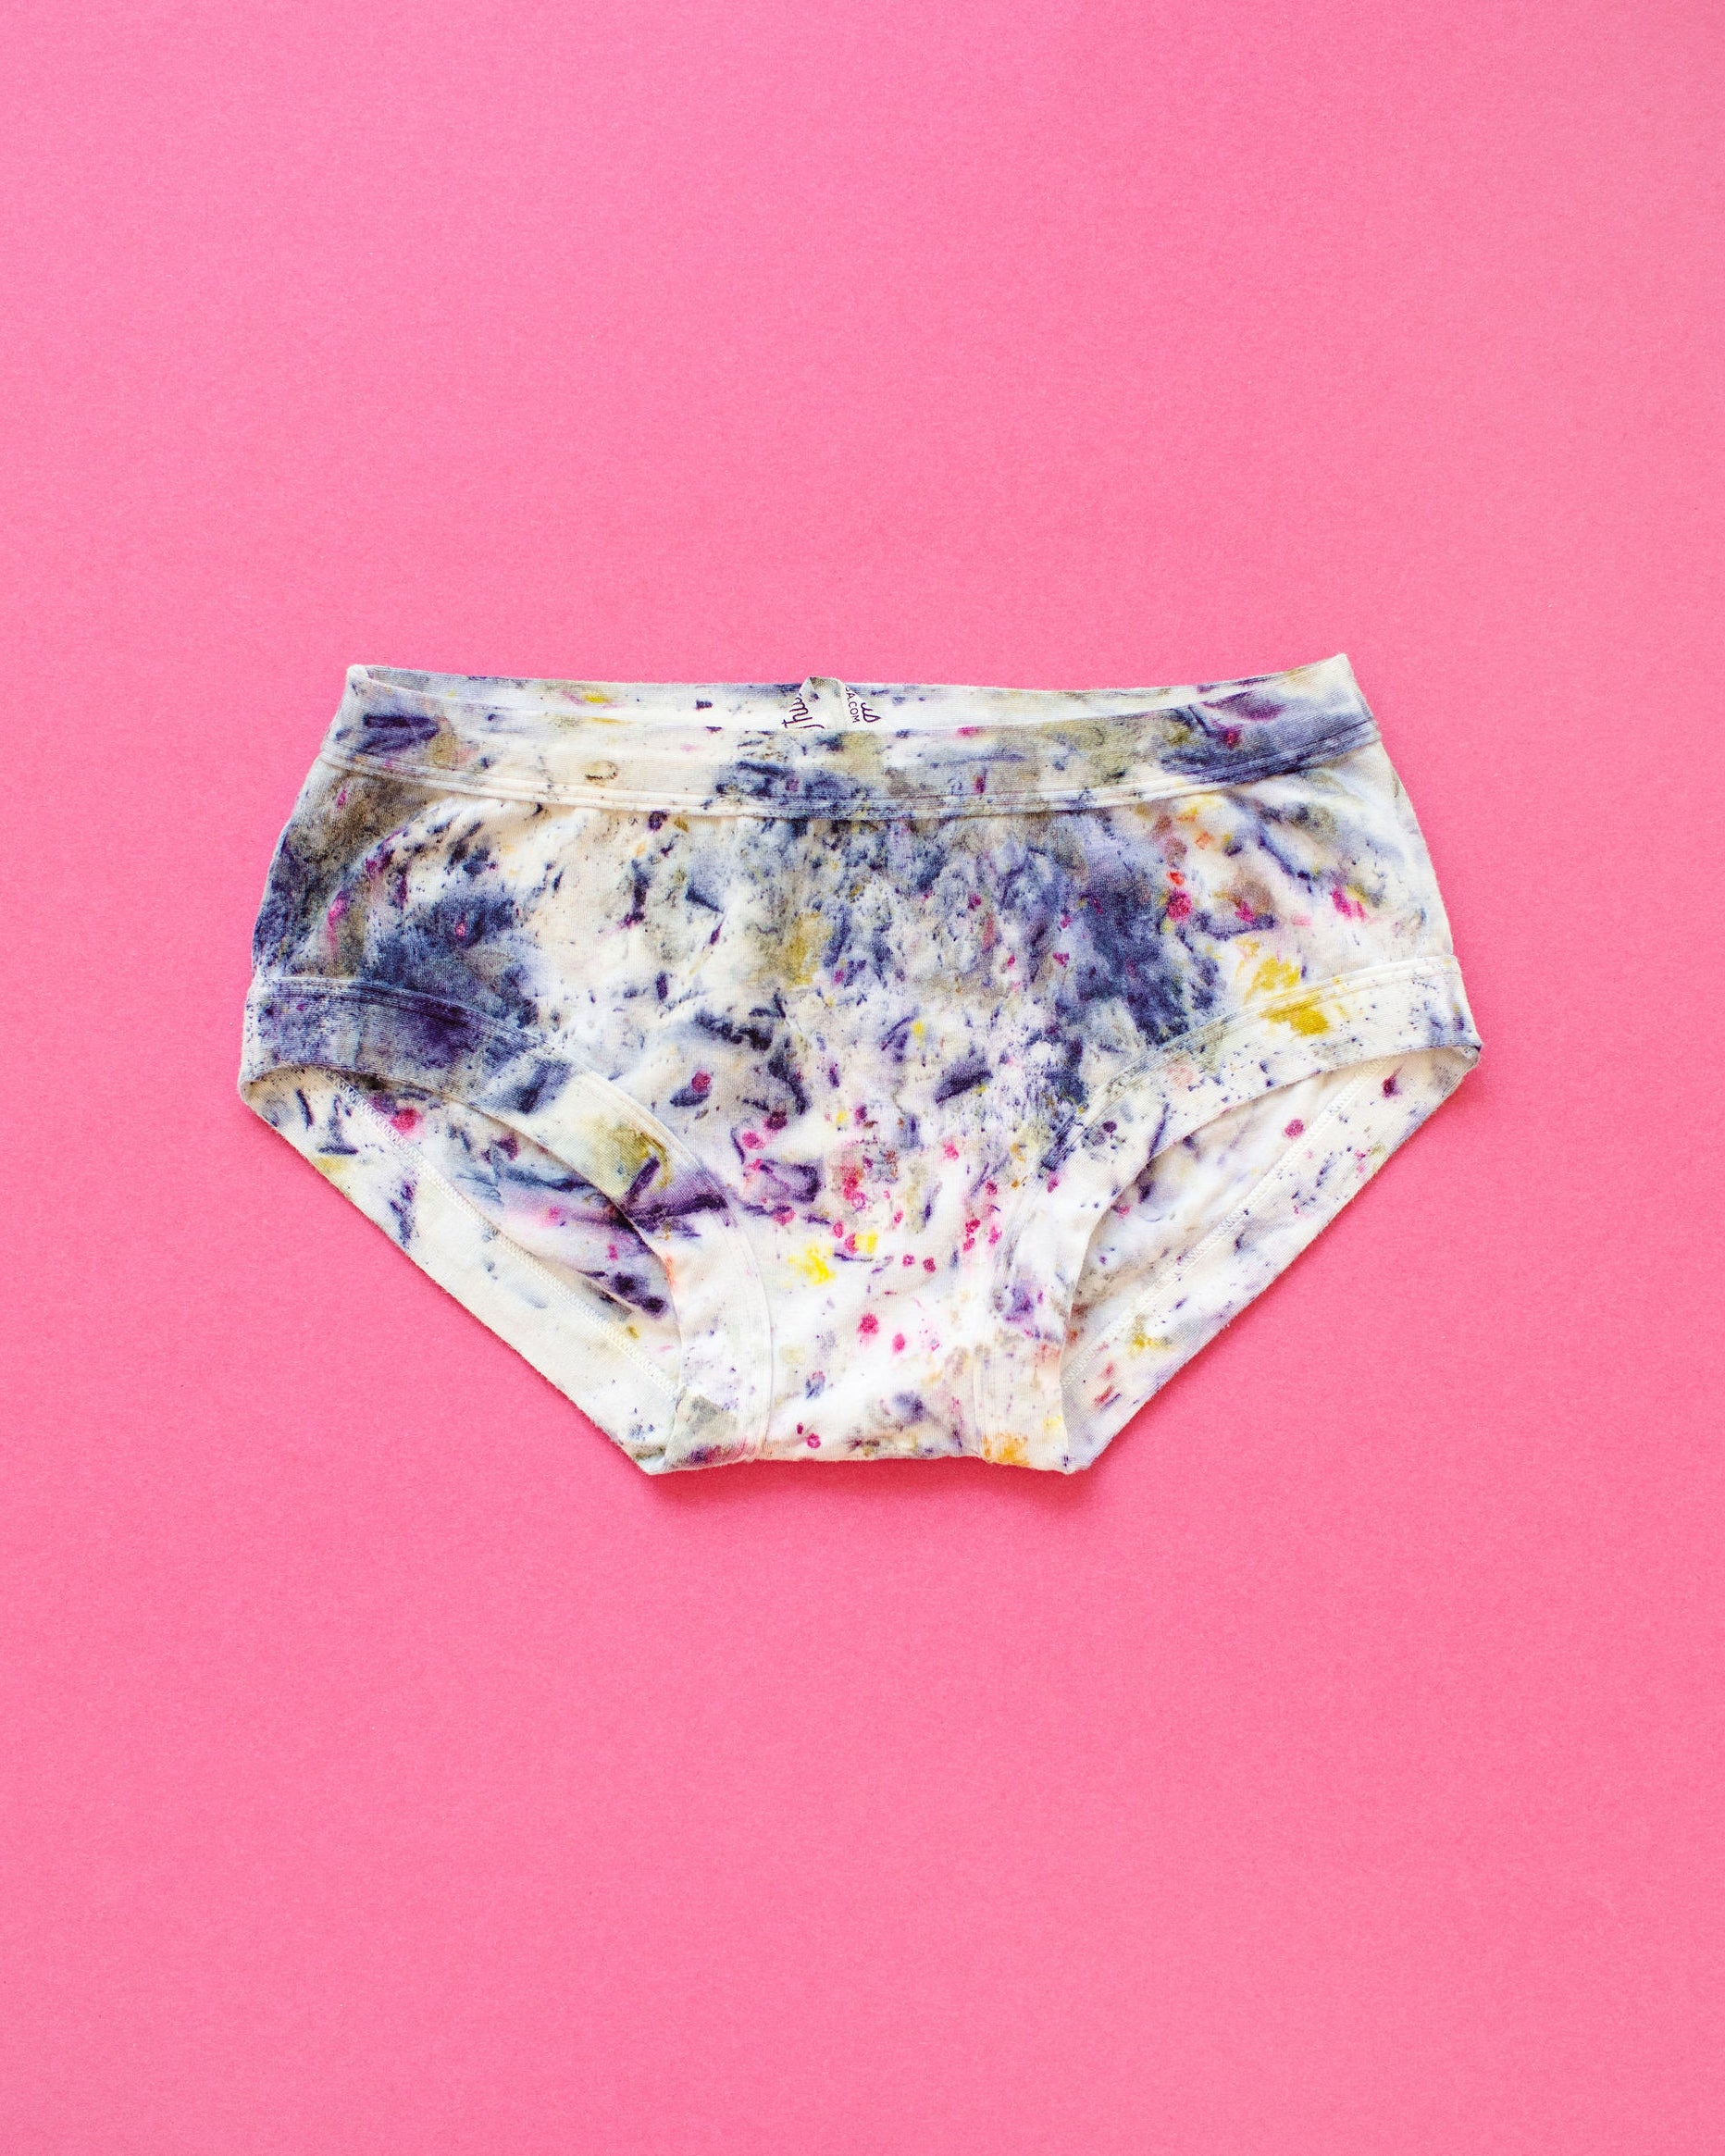 Flat lay of Thunderpants Hipster style underwear in Cosmic Compost hand dye.